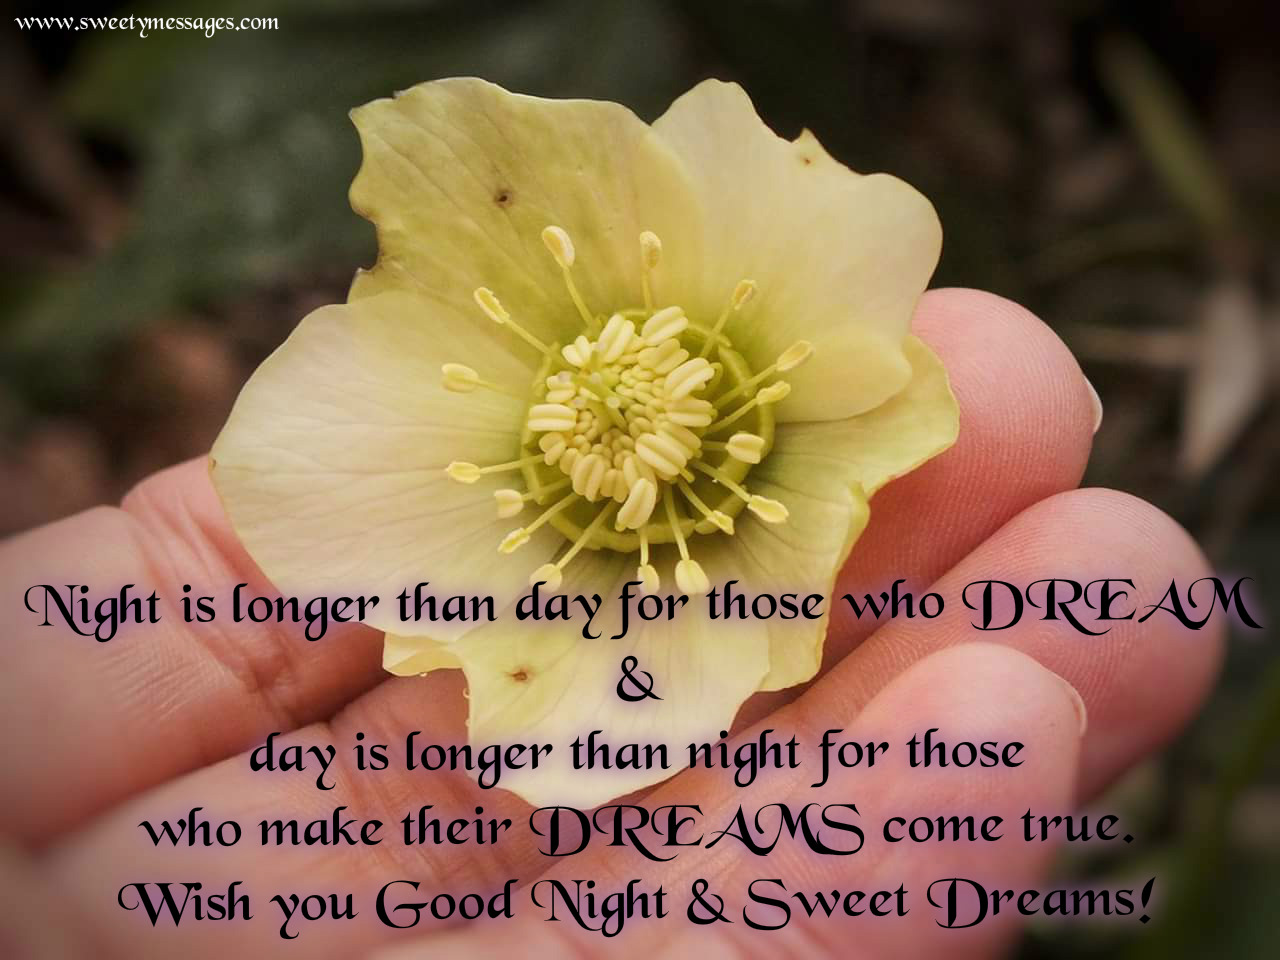 Night is longer than day for those who DREAM & day is longer than night for those who make their DREAMS e true Wish you Good Night & Sweet Dreams